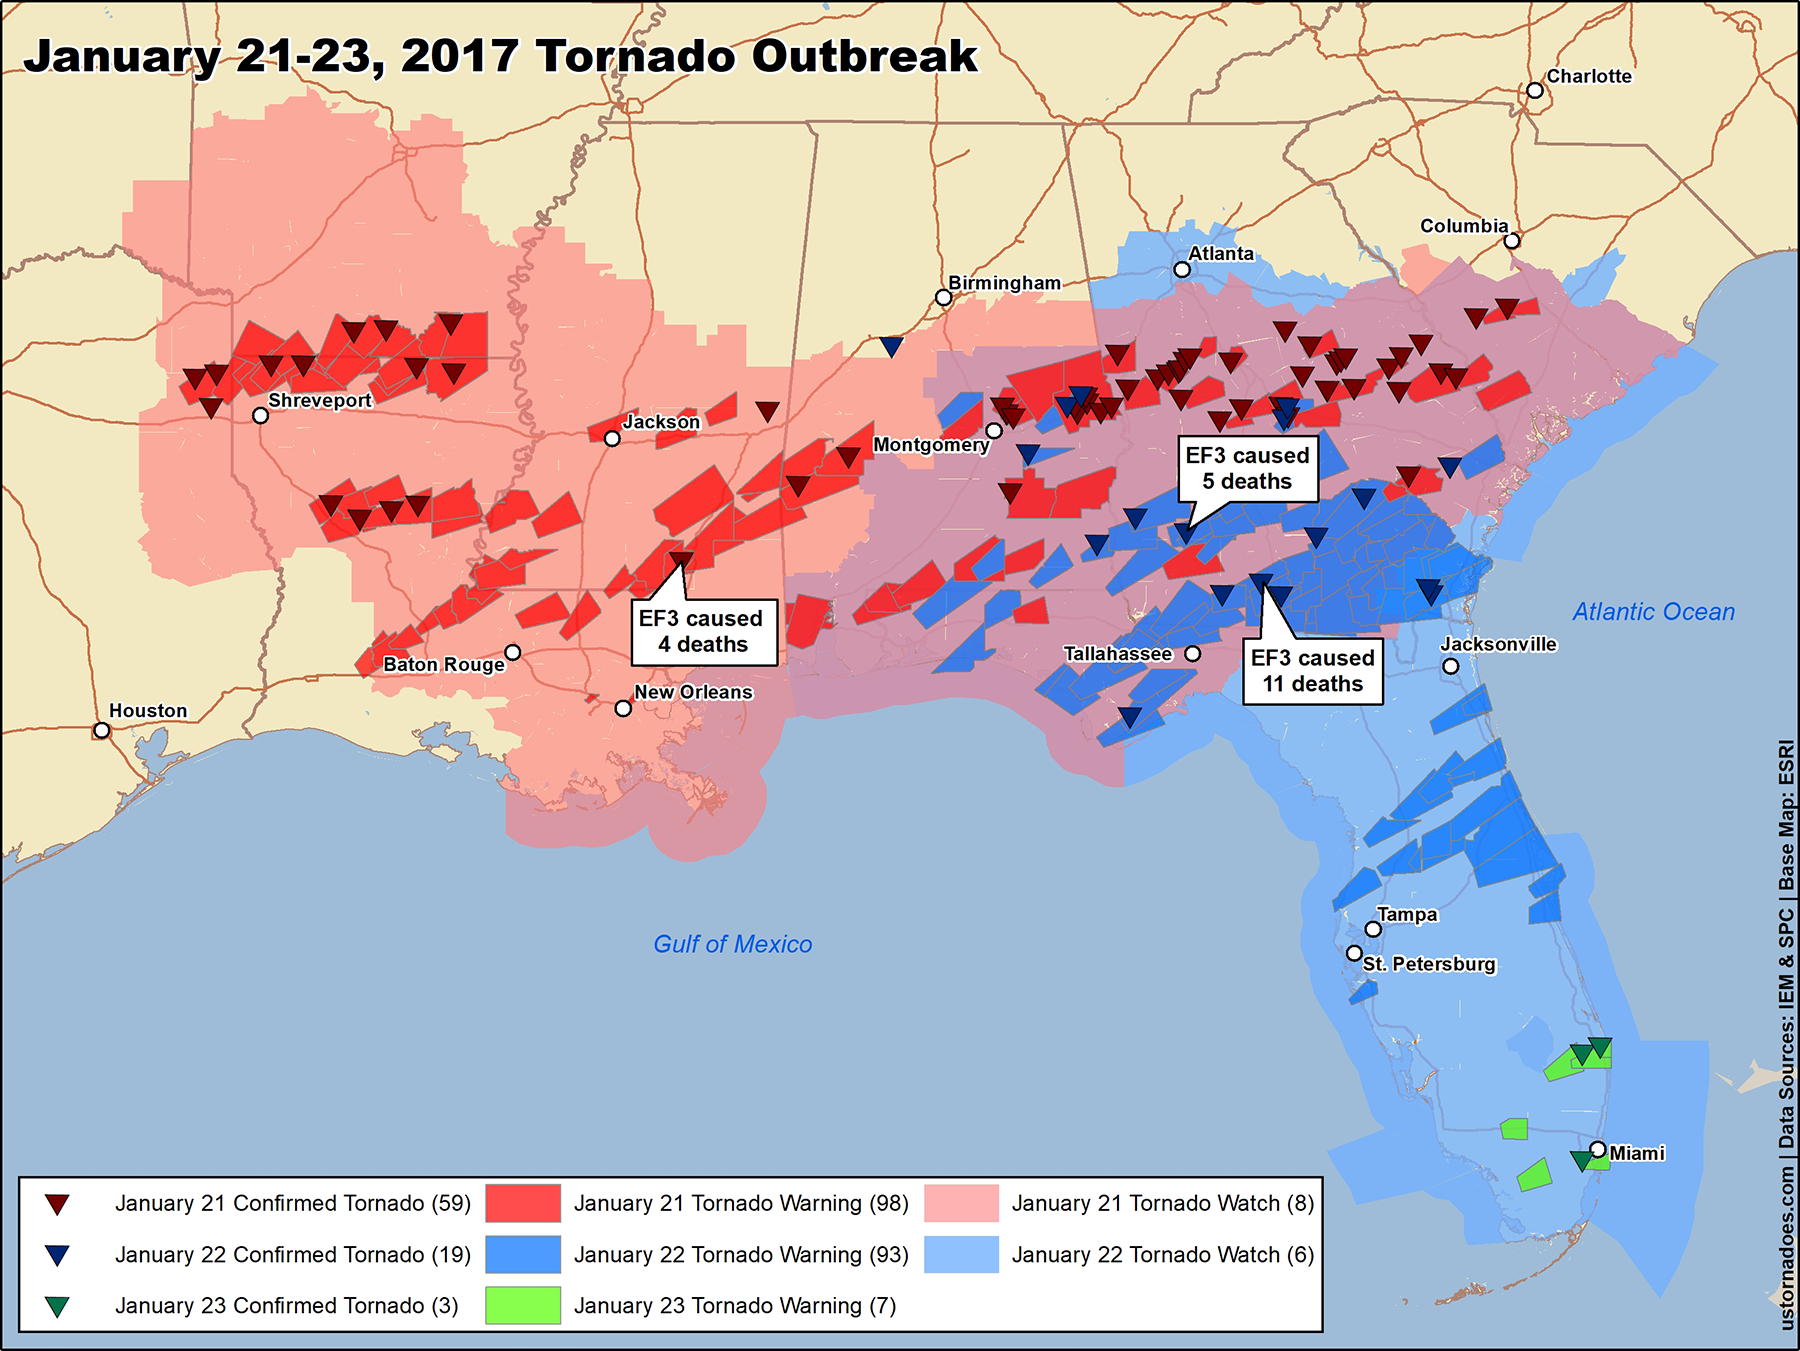 The largest tornado outbreaks of 2017 U.S. Tornadoes